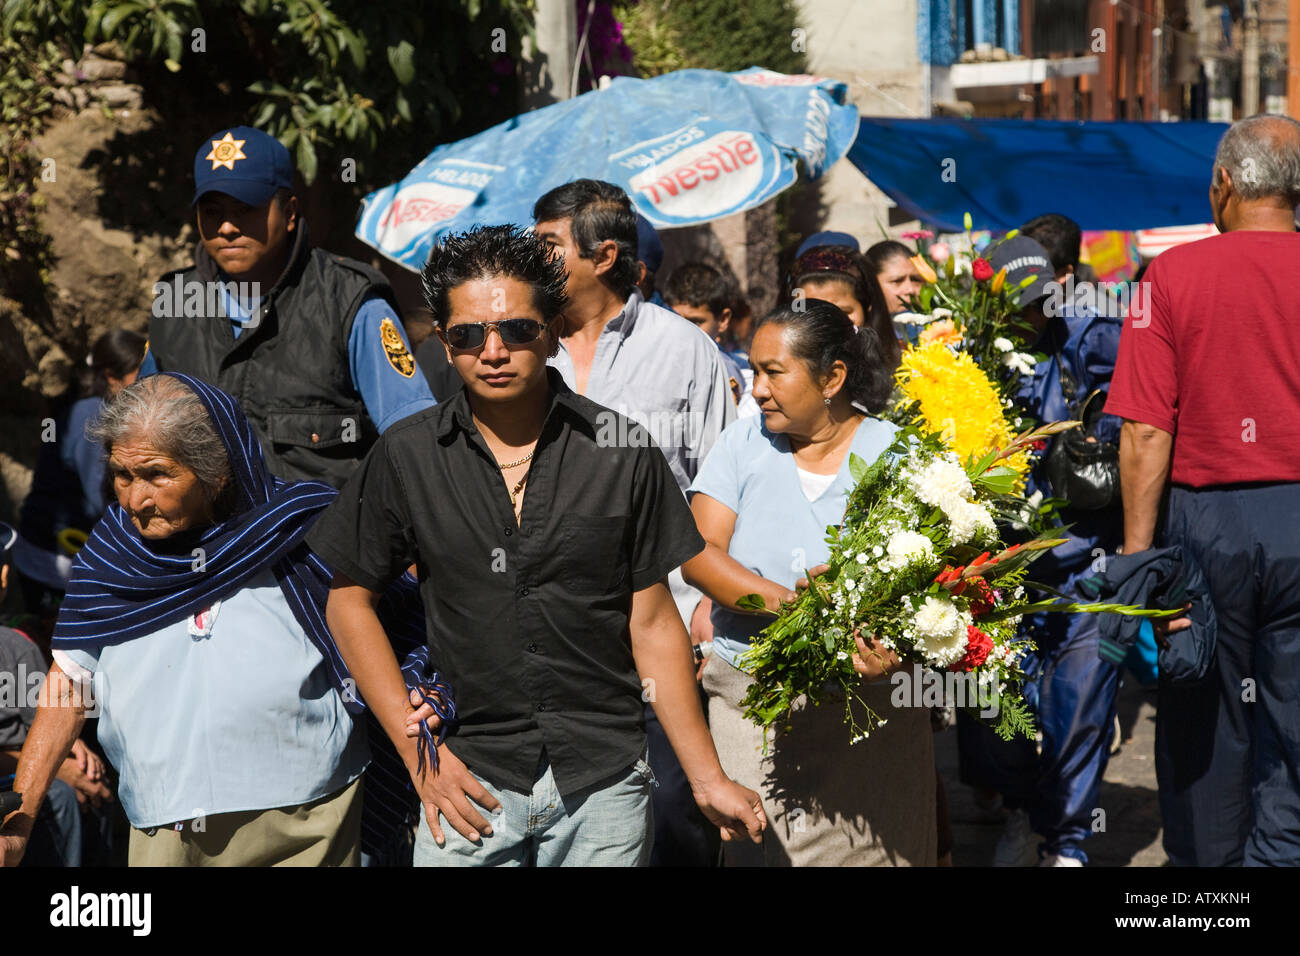 MEXICO Guanajuato Mexican men and woman grandmothers and teens walking toward cemetery Day of the Dead celebration bouquets Stock Photo